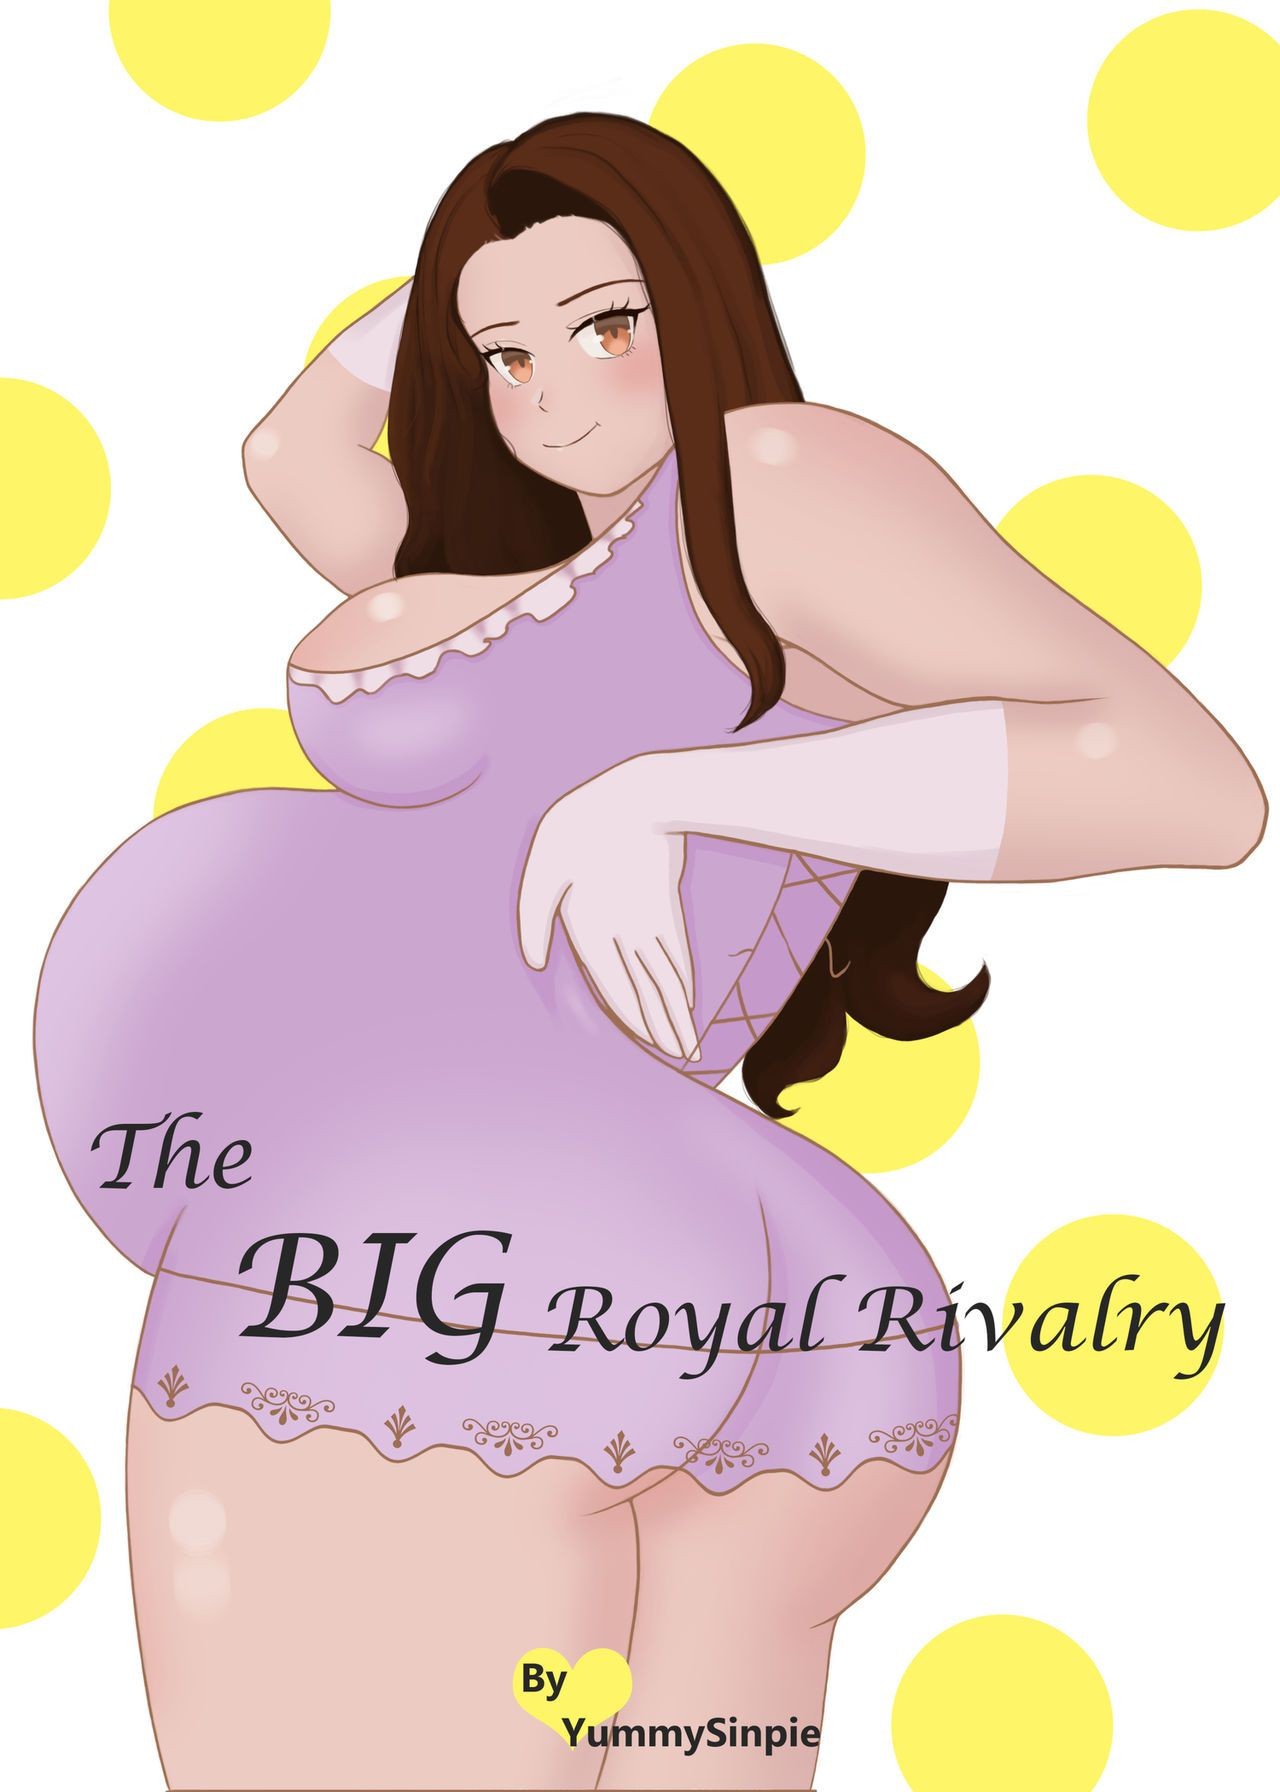 Amateur Asian [YummySinpie] The BIG Royal Rivalry (ongoing) Cowgirl